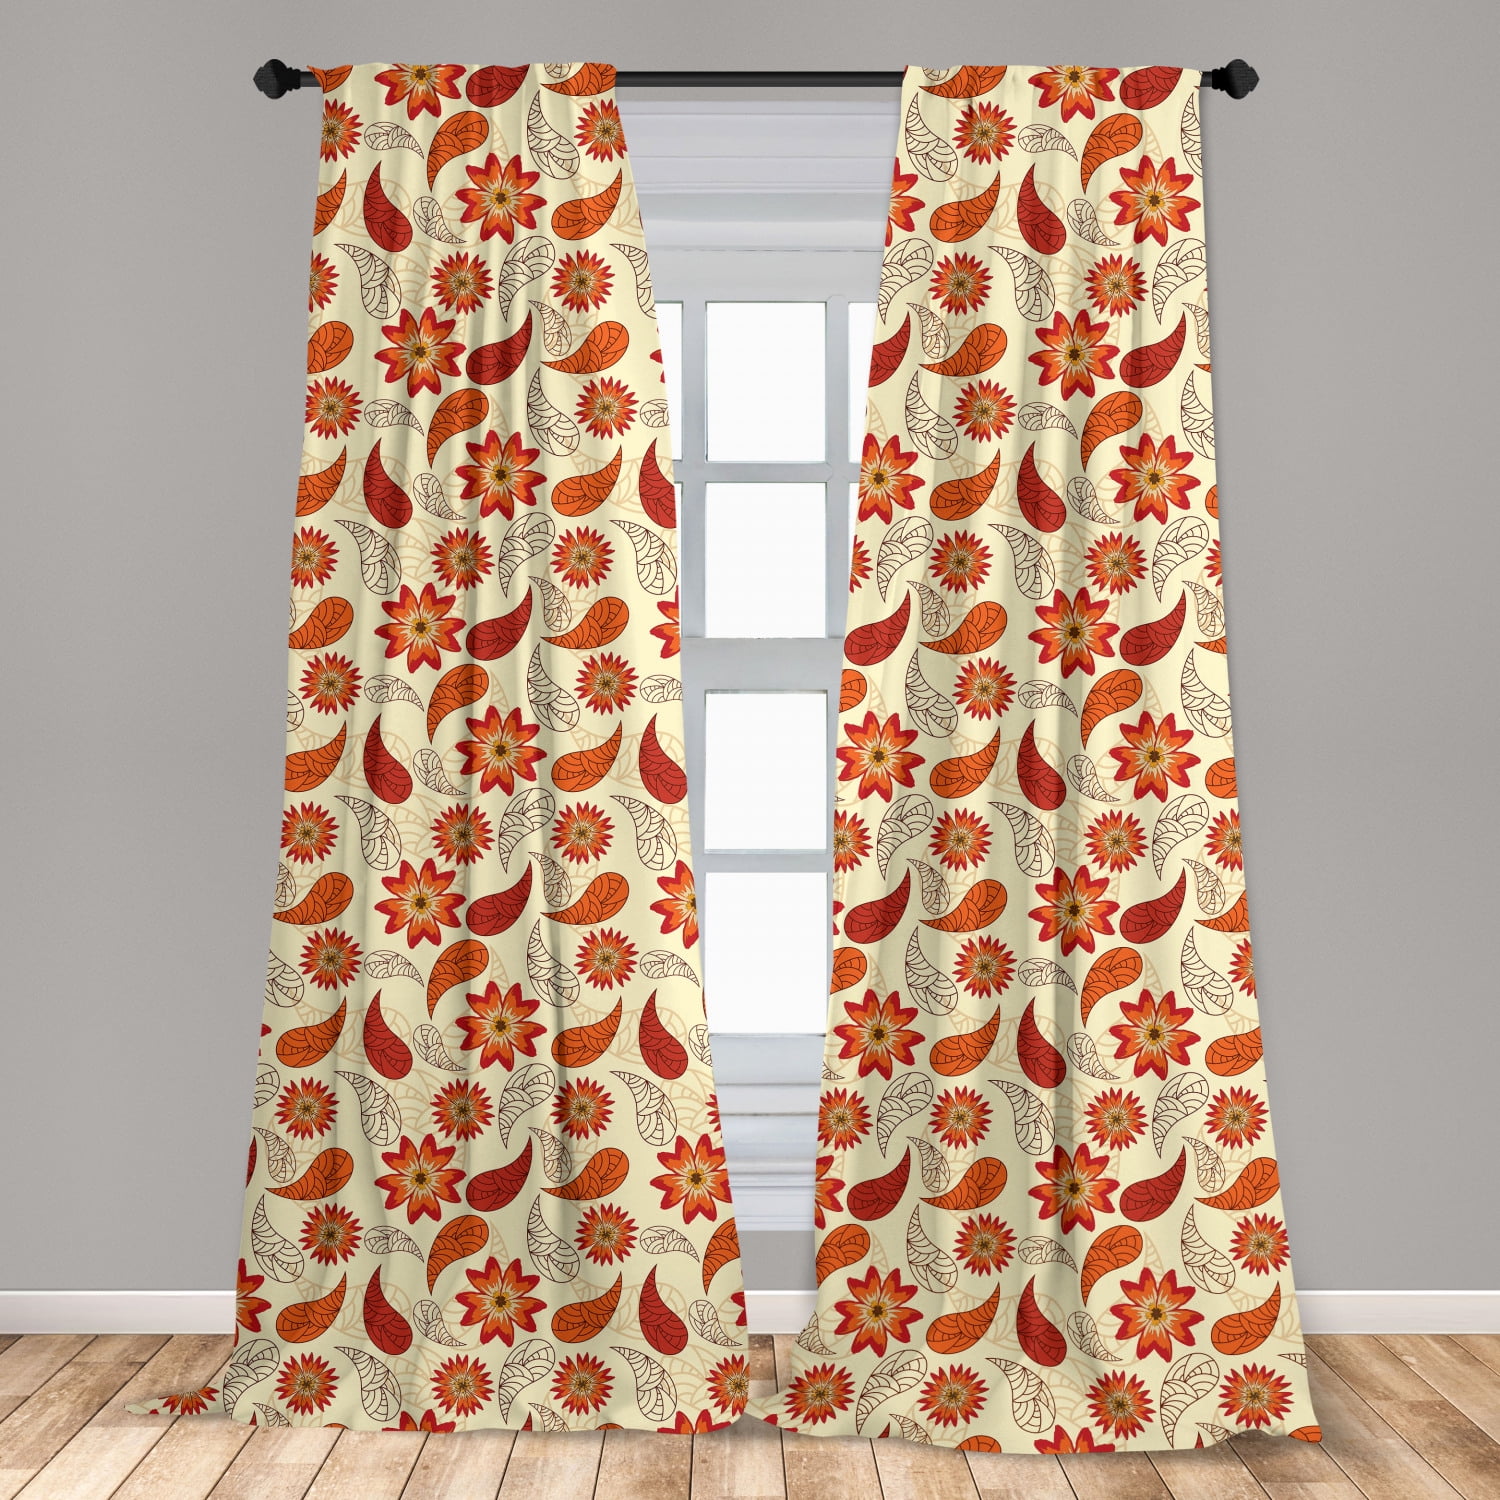 Red Poppy Flower on Black Window Curtain Drapes Short Kitchen Curtains 2 Panels 